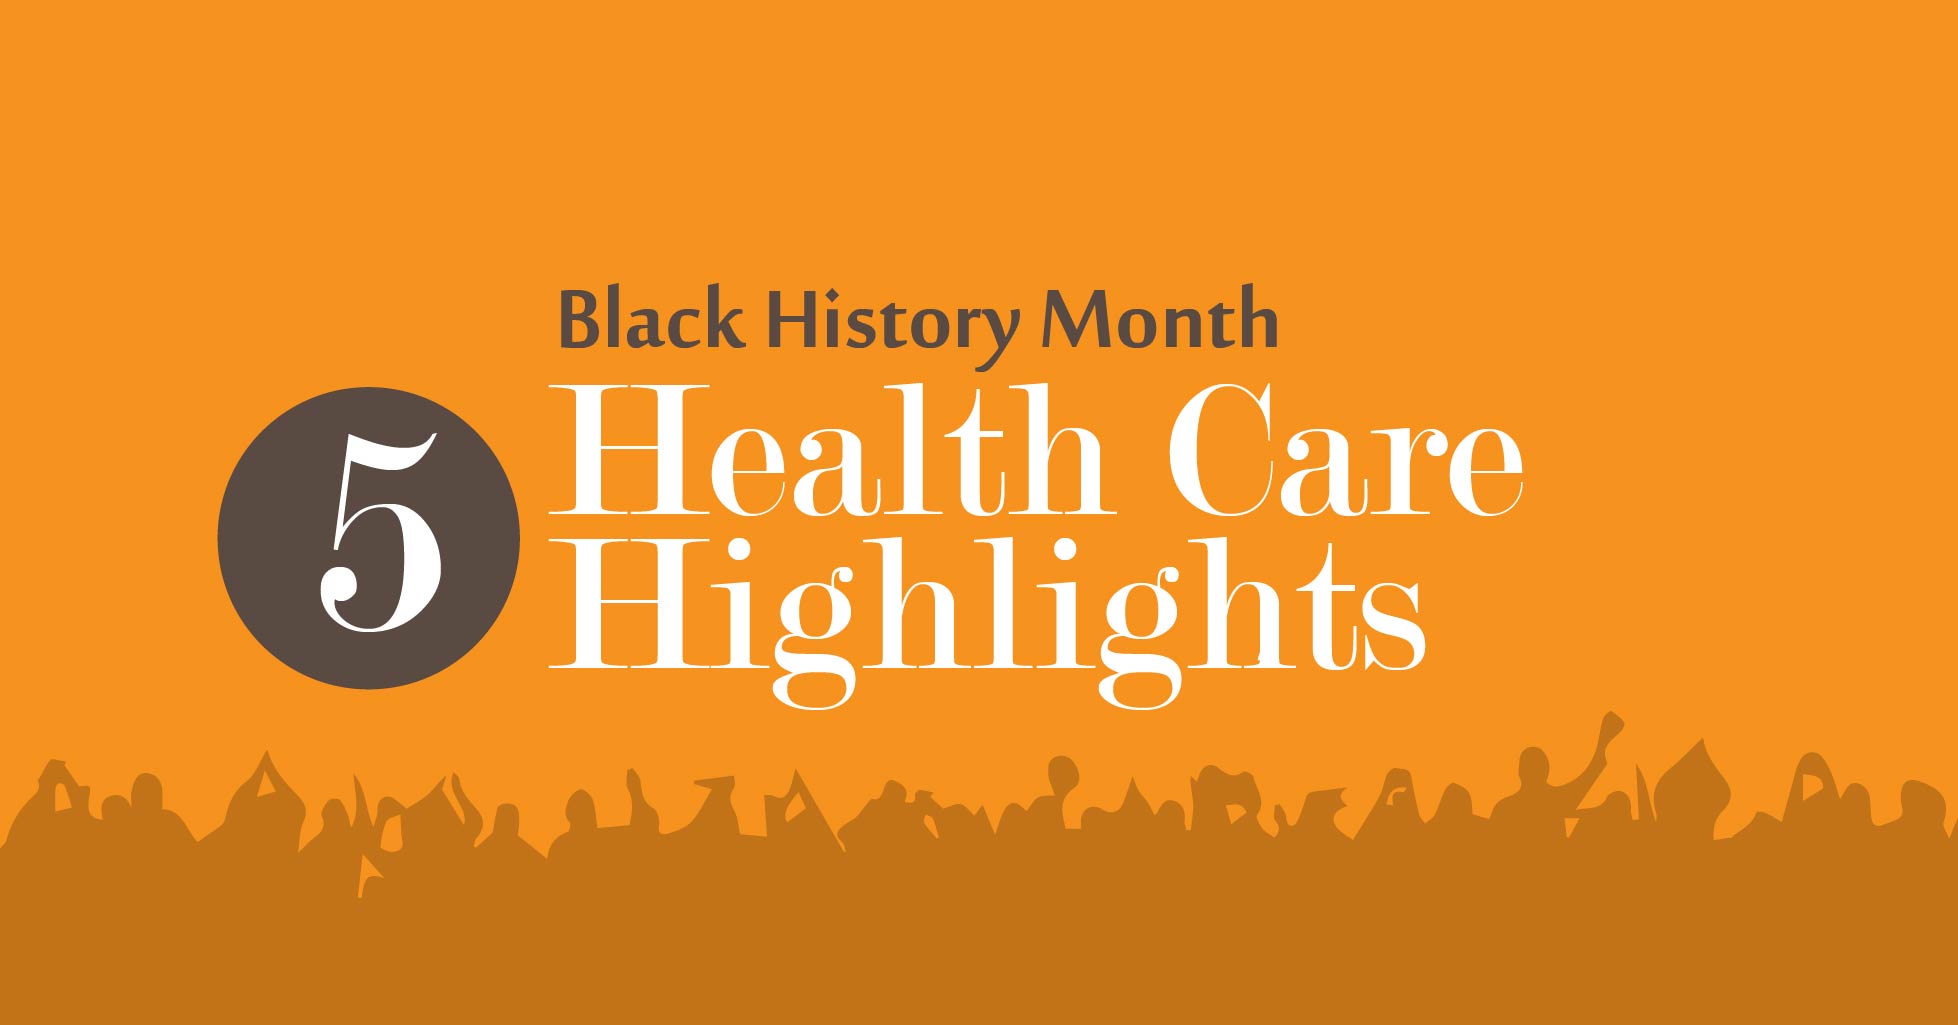 Black History Month: 5 Health Care Highlights